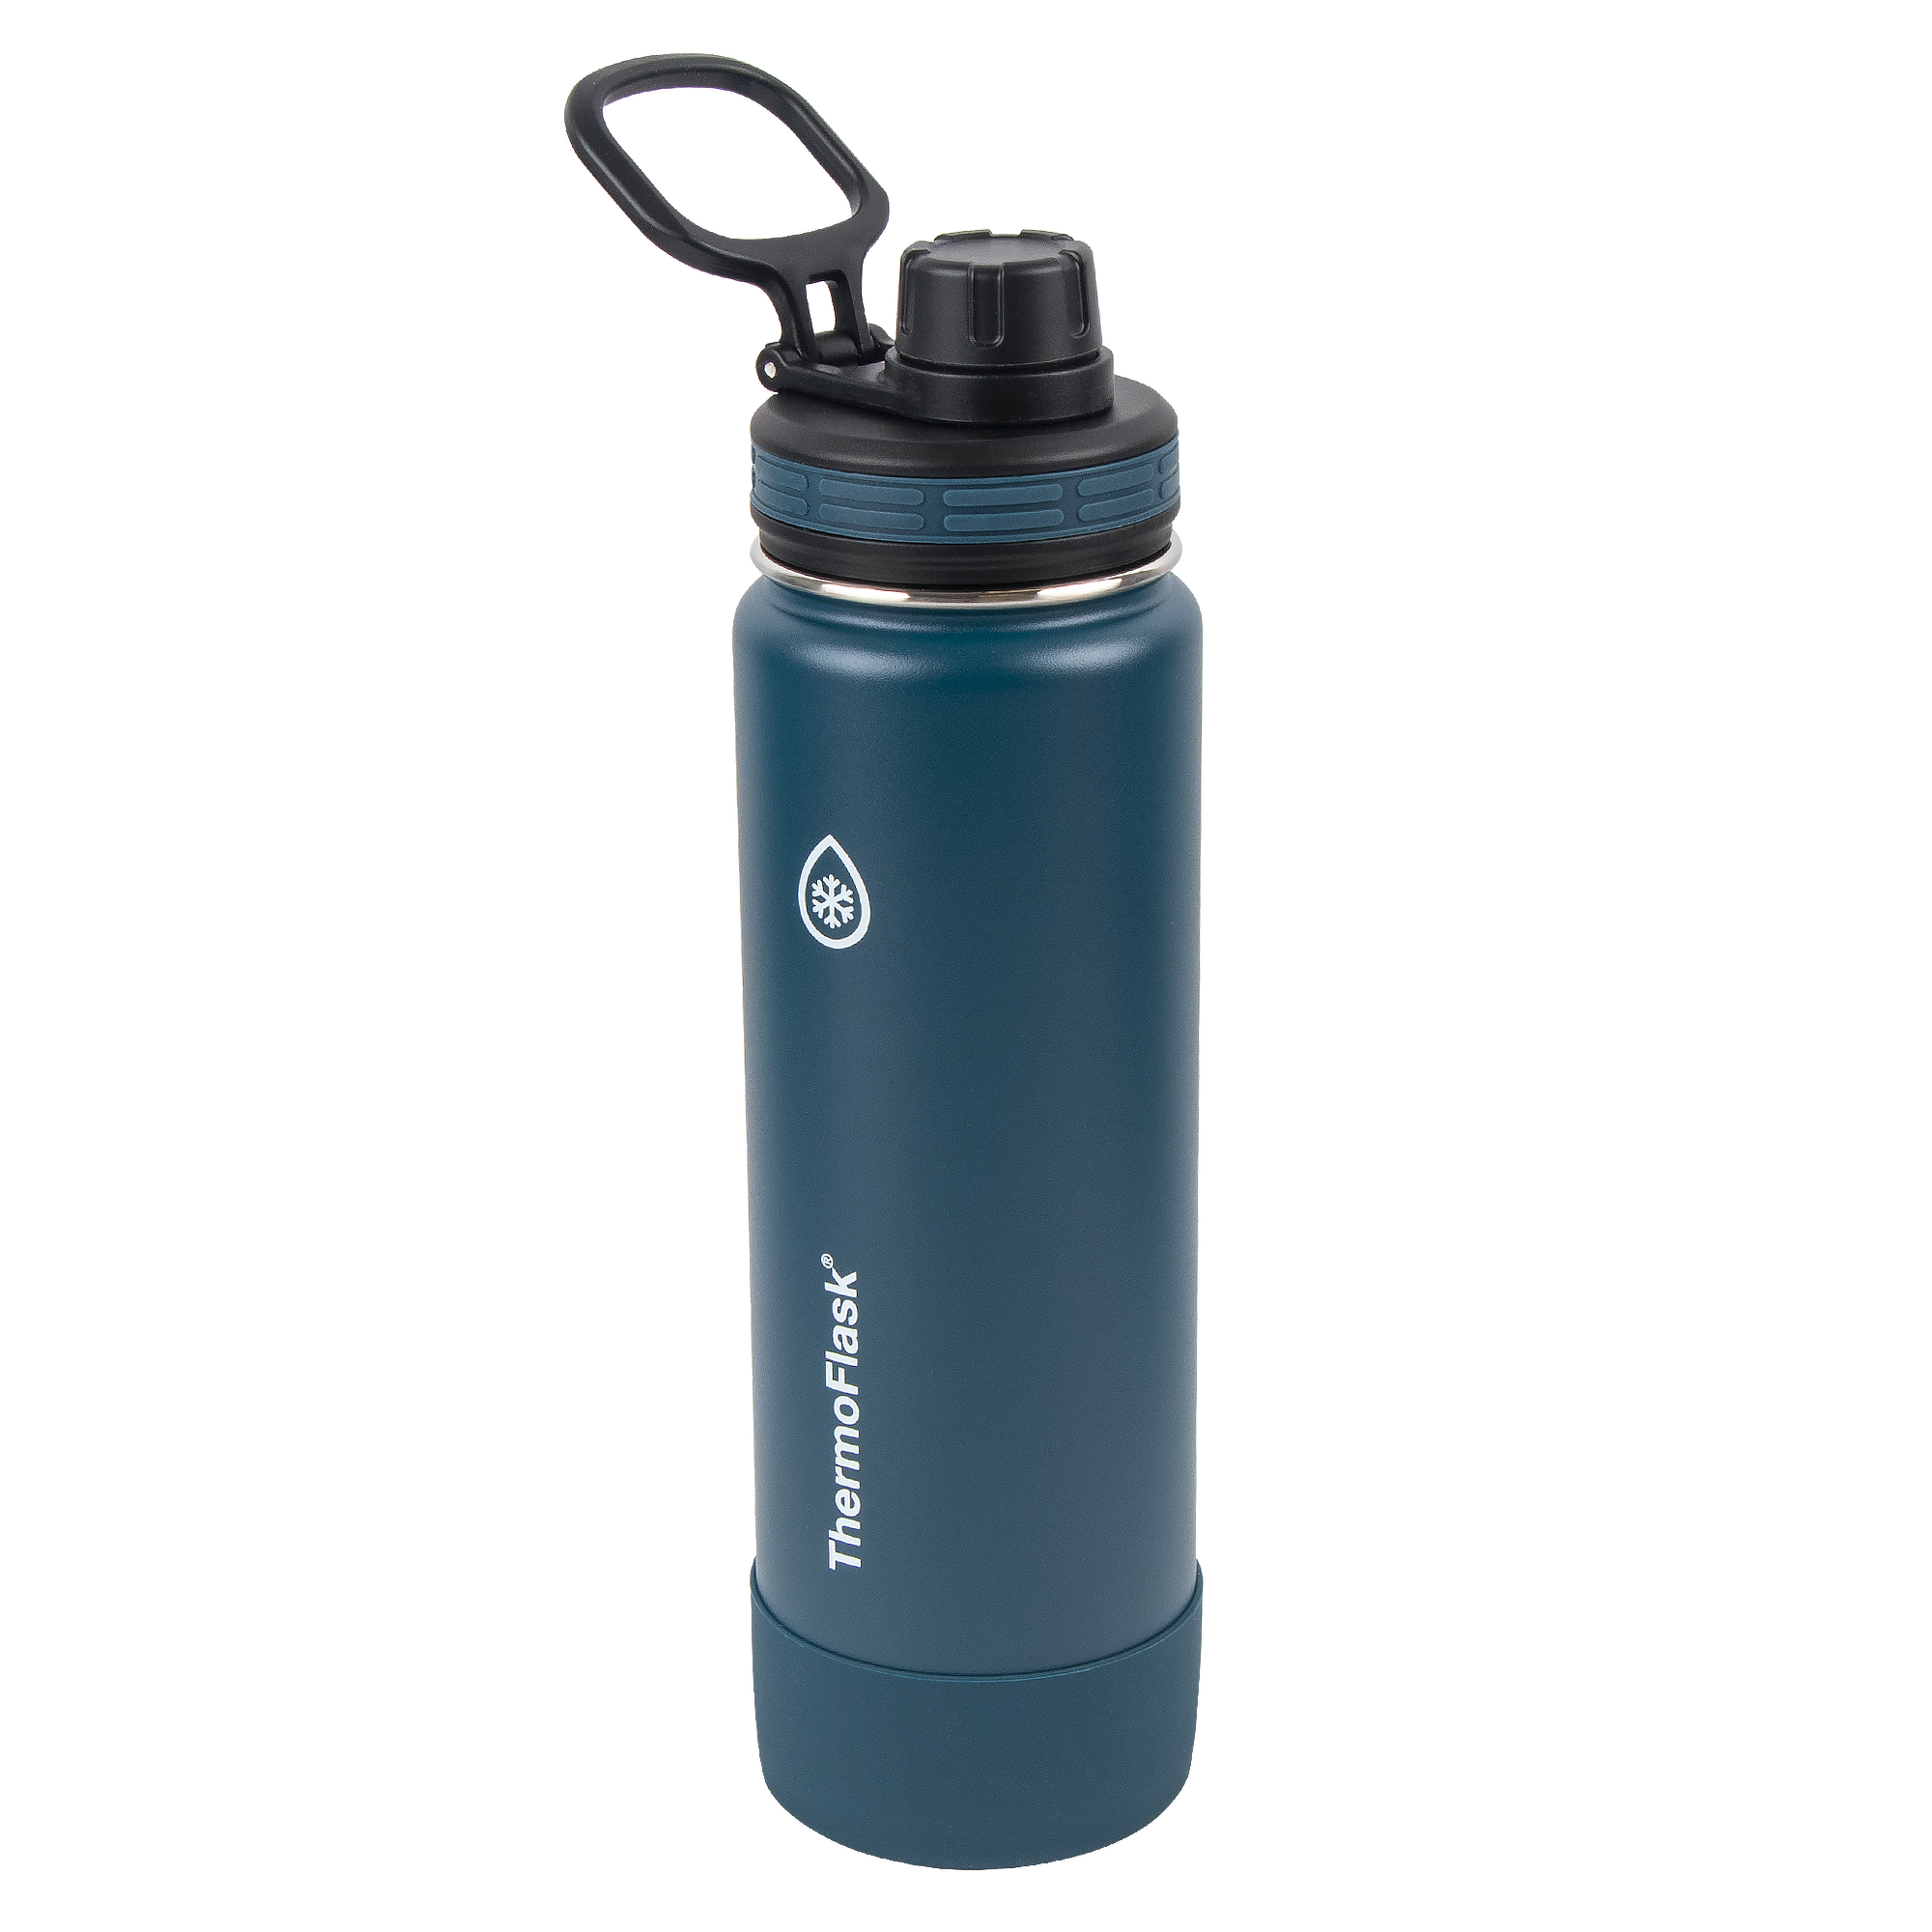 Promotional Hydra 24 oz Vacuum Insulated Water Bottle $19.85